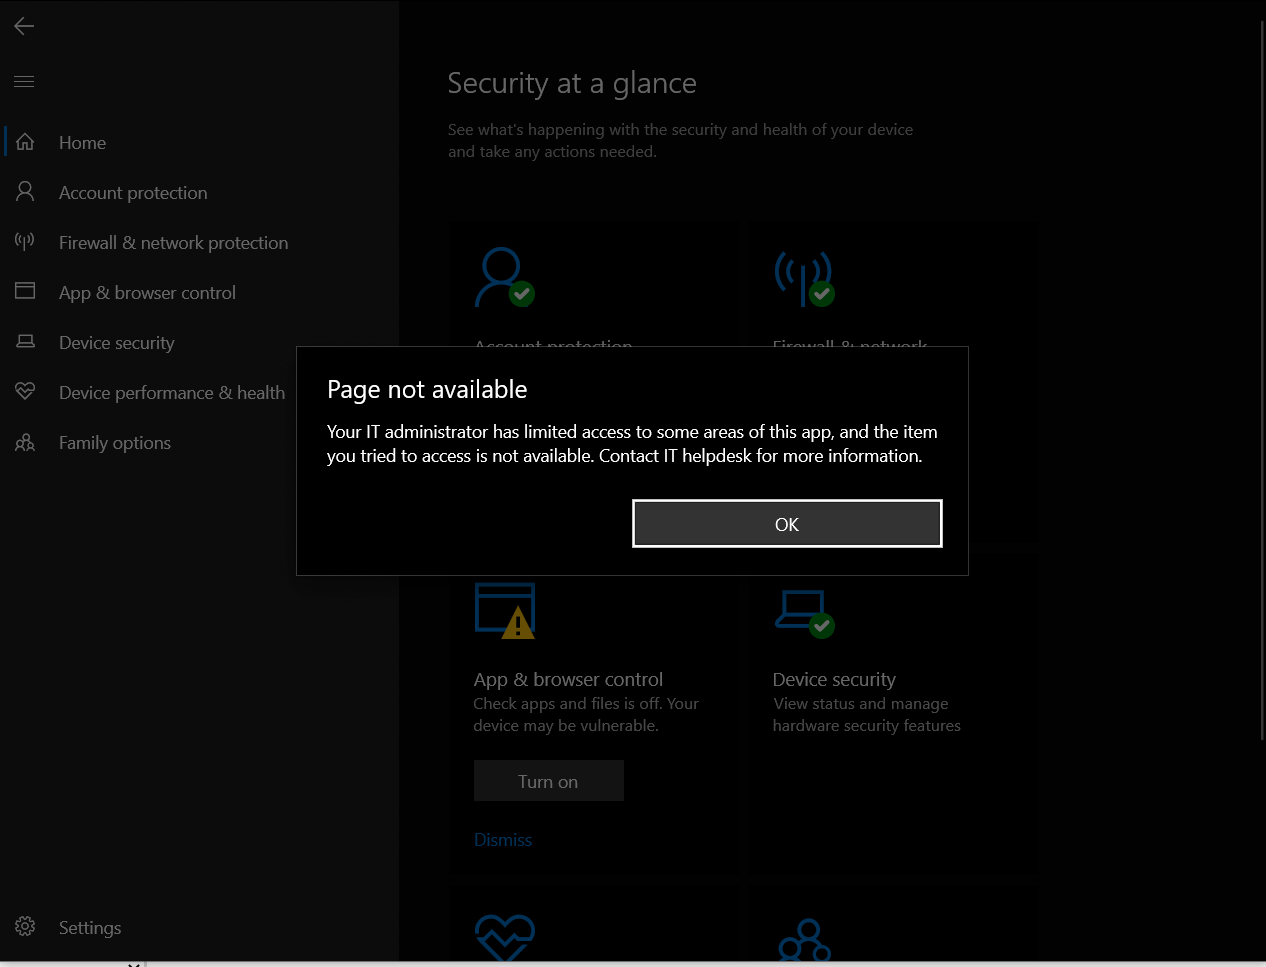 Windows 10 virus & threat protection page not available a274ba86-e074-4a96-bdd5-25d0c8fd19e0?upload=true.png